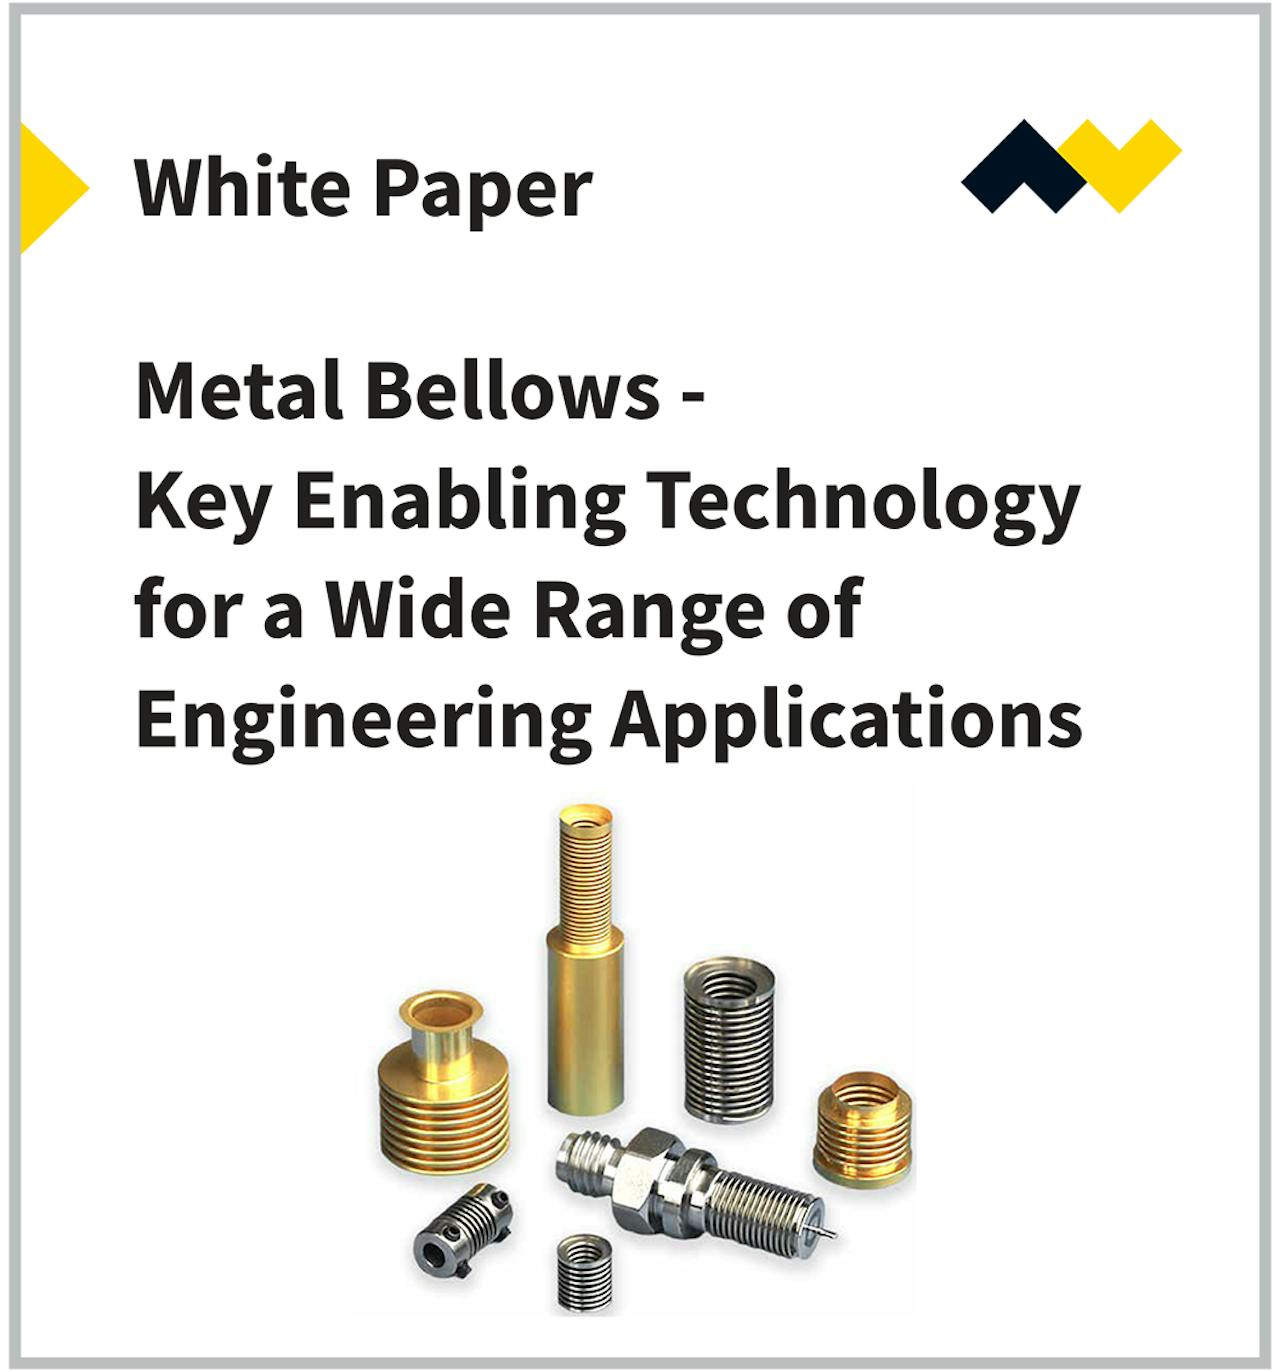 Metal Bellows Key Enabling Technology for a Wide Range of Engineering Applications